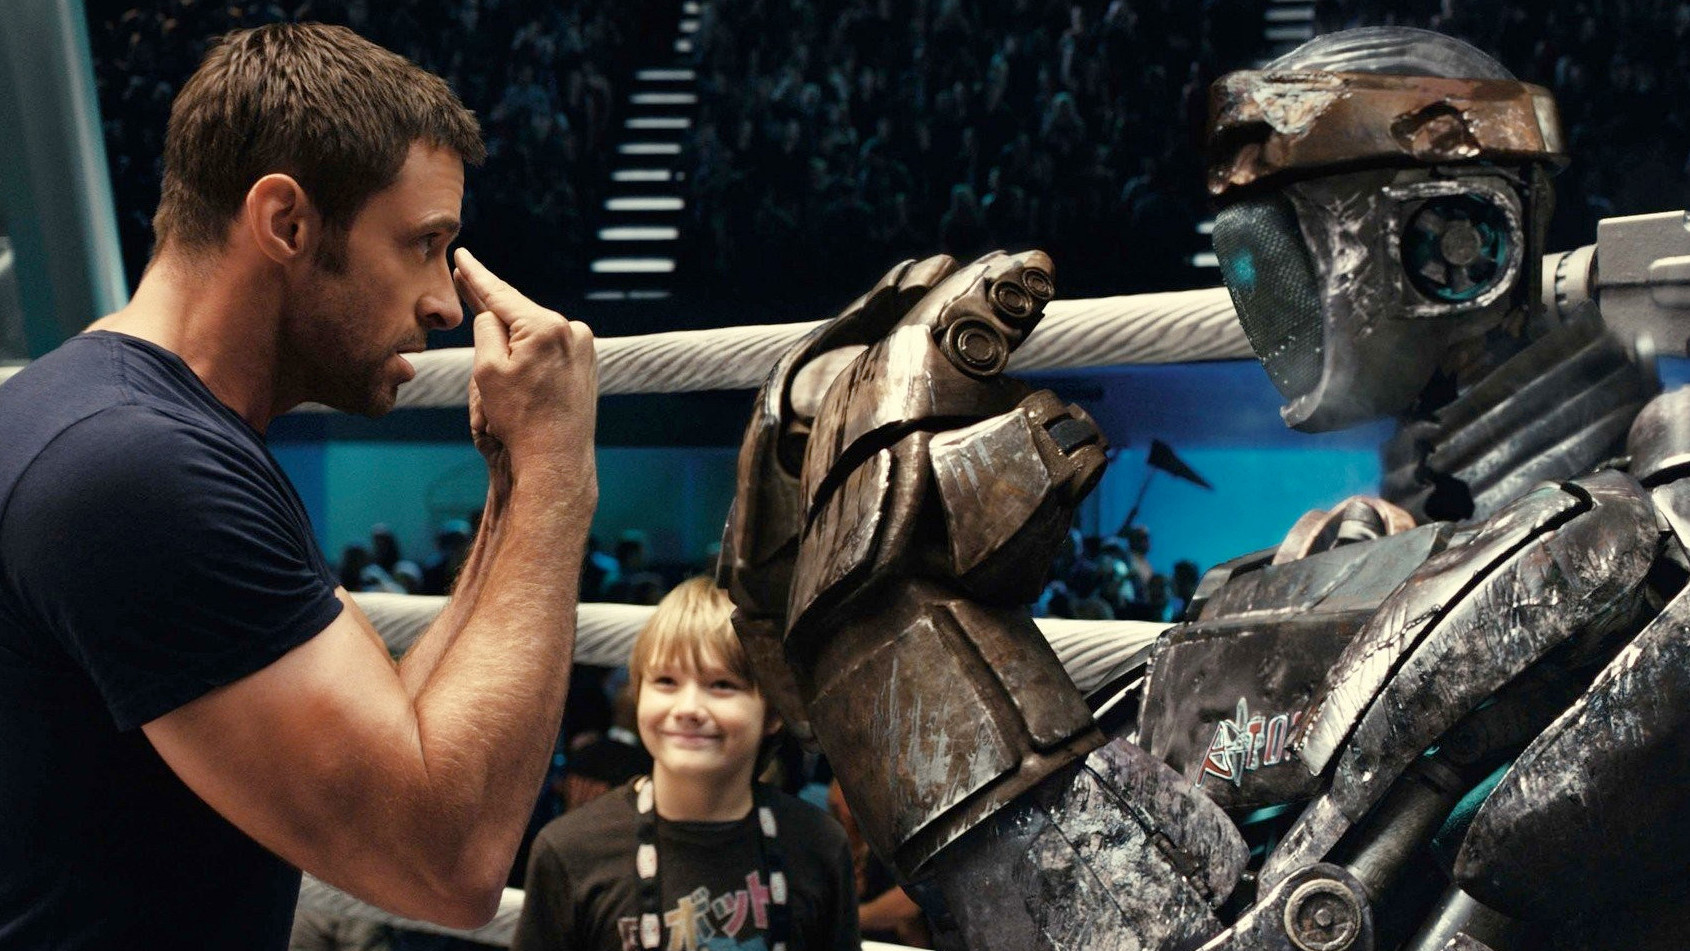 Hugh Jackman training a robot fighter in Real Steel. (Photo: Disney)